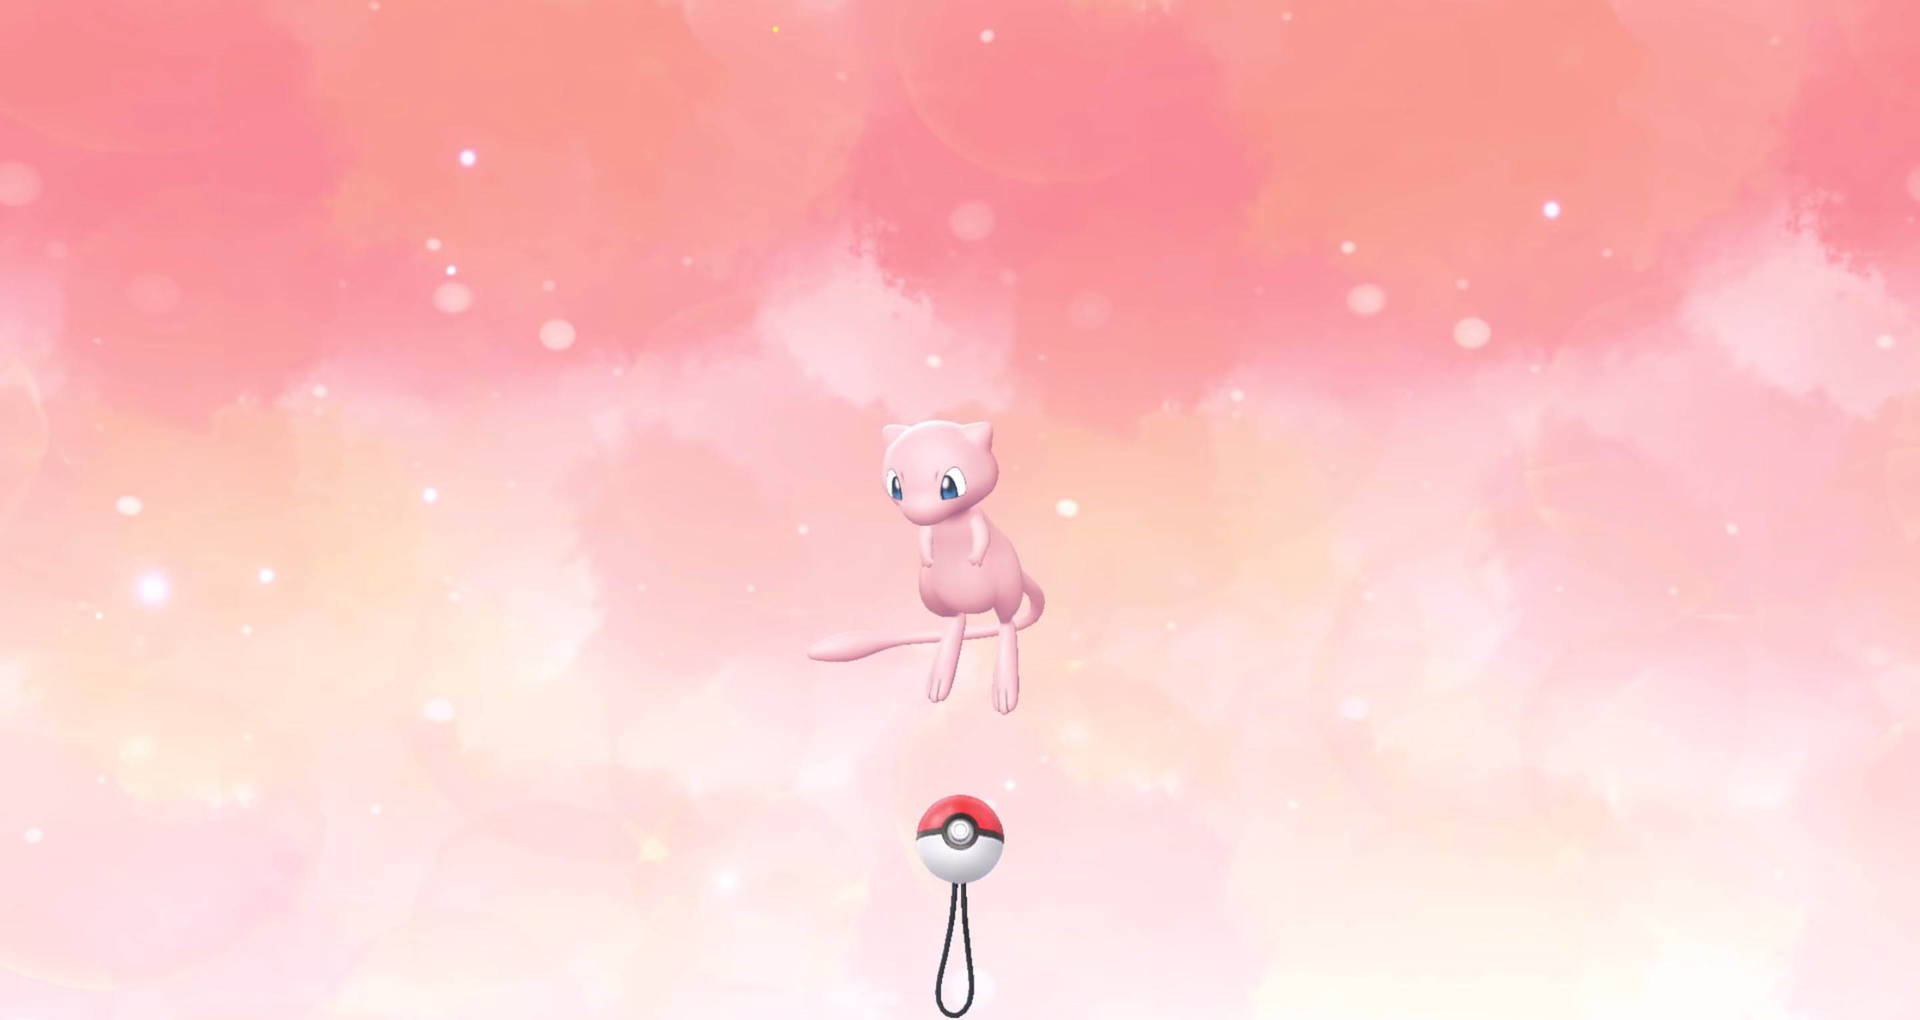 Mew 2879X1530 Wallpaper and Background Image